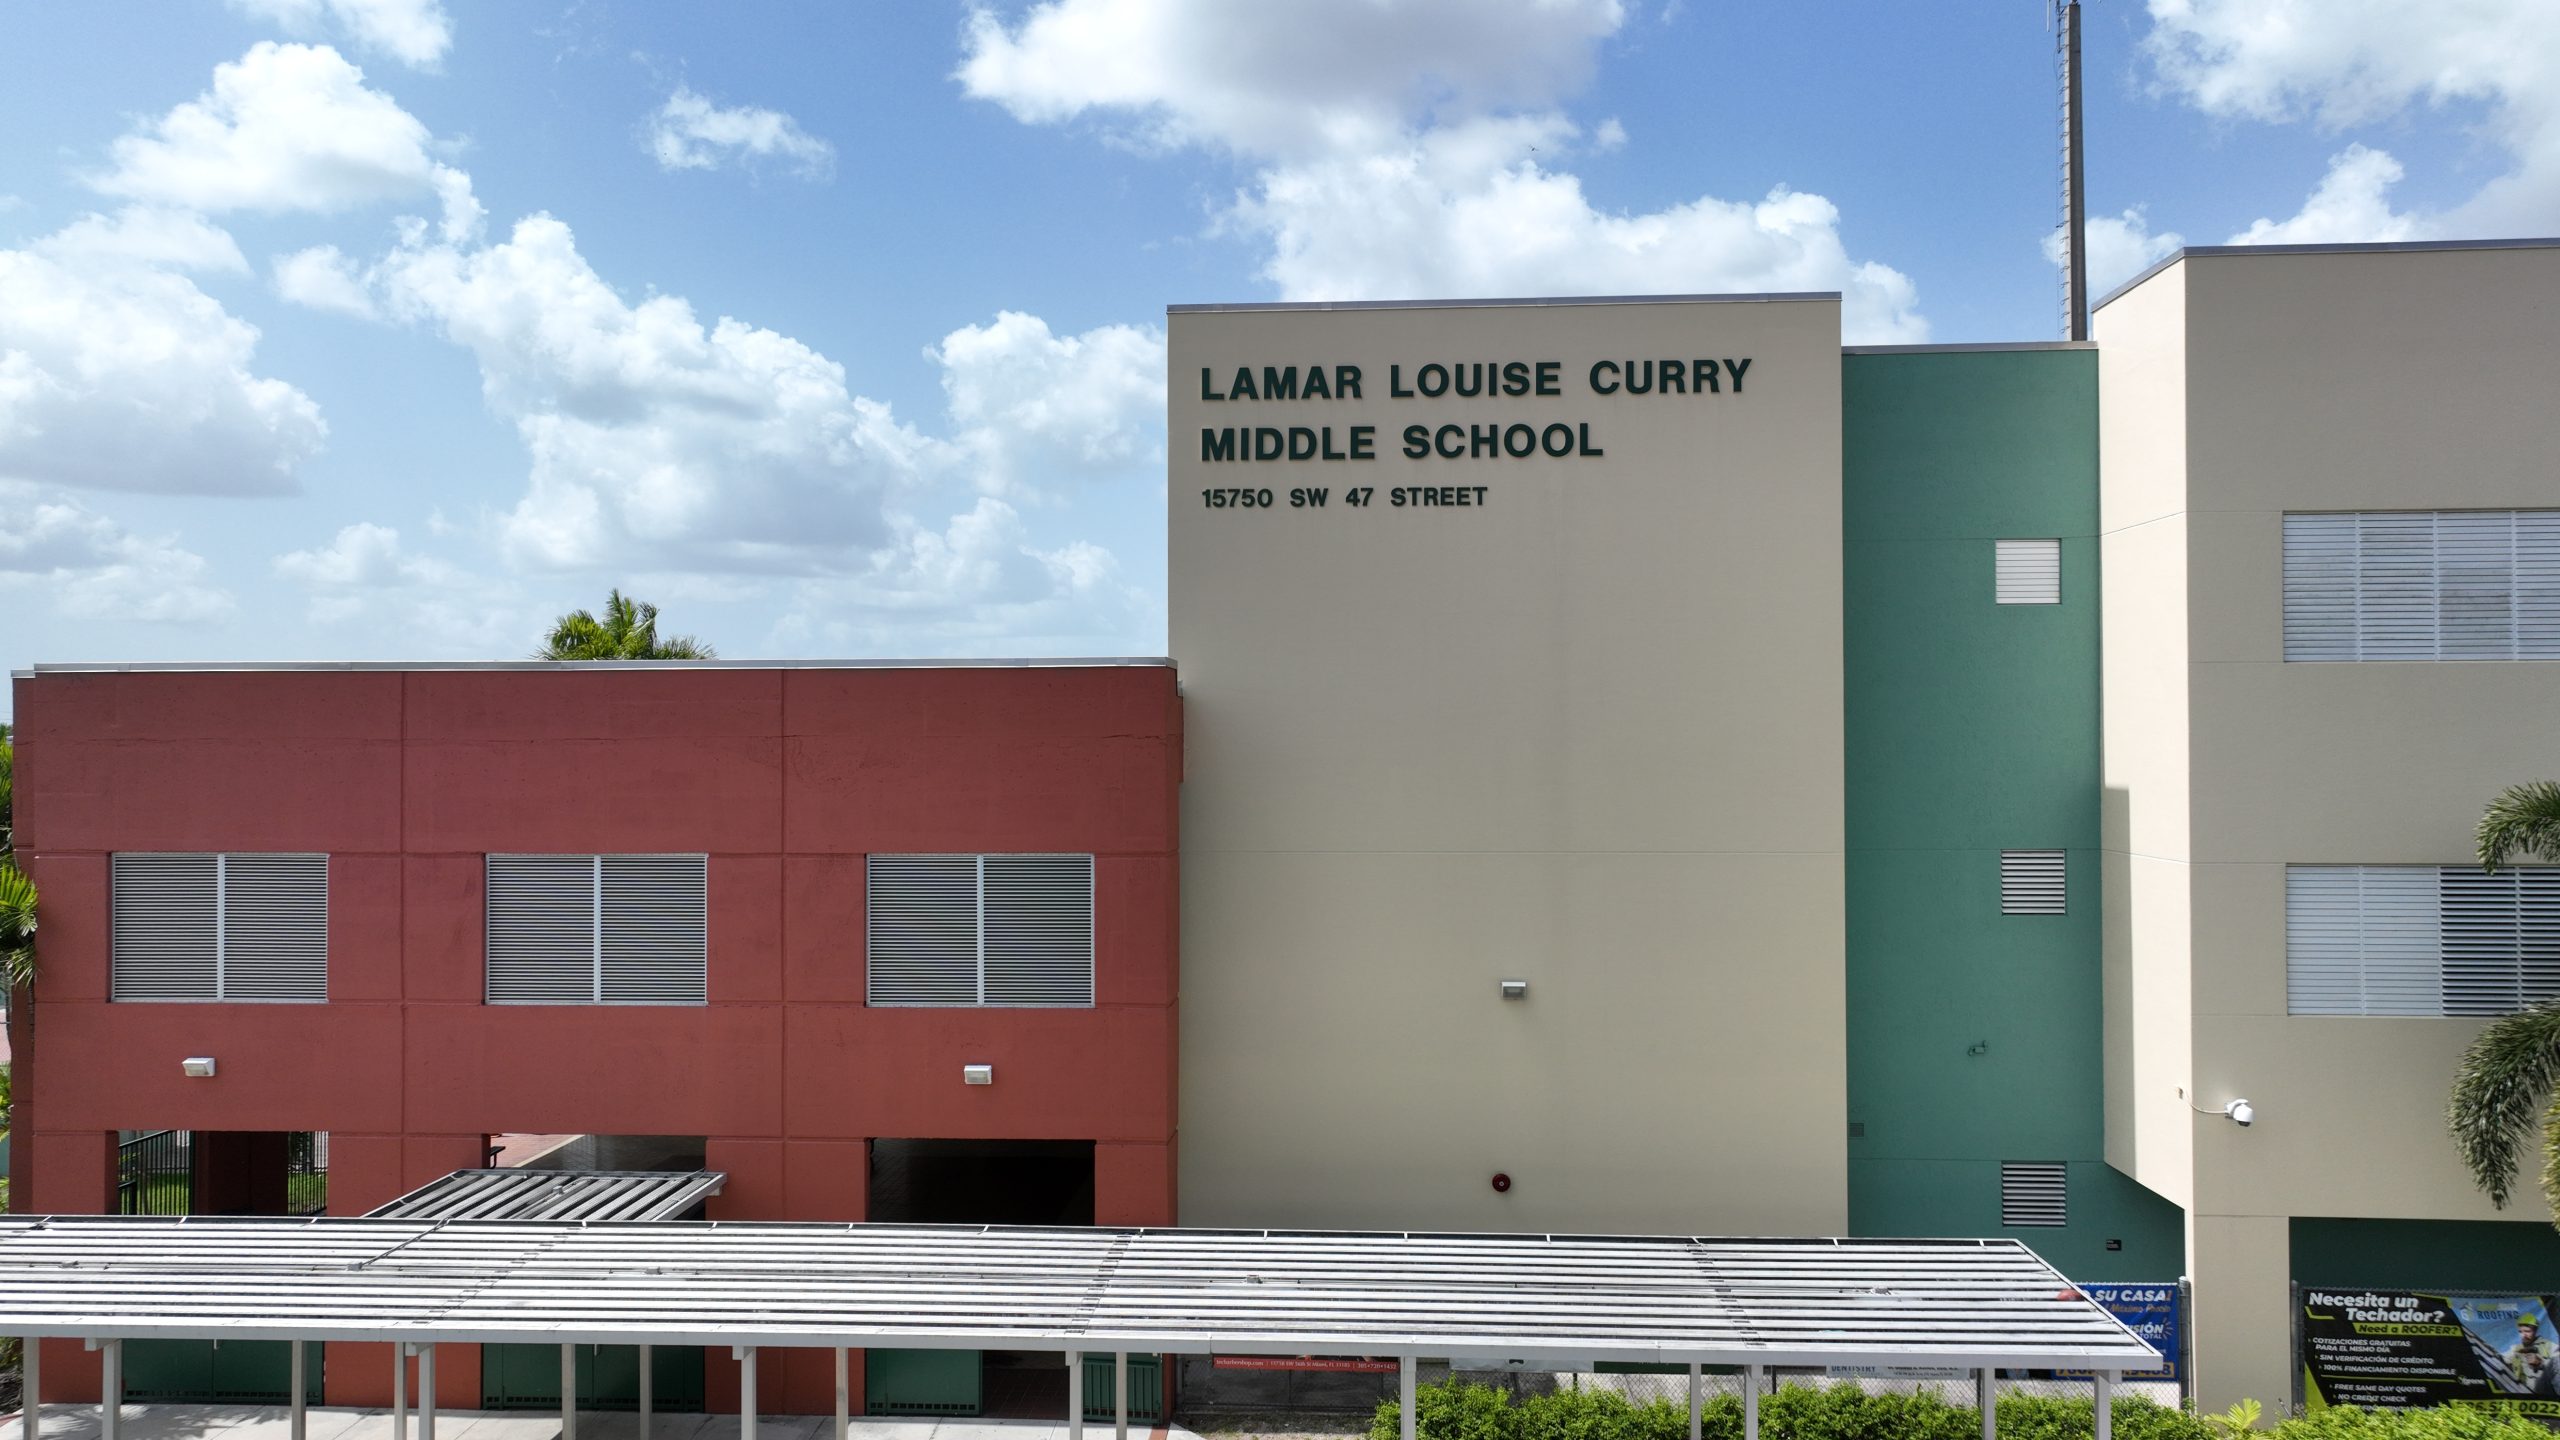 ABOUT… MISS LAMAR LOUISE CURRY – Lamar Louise Curry Middle School